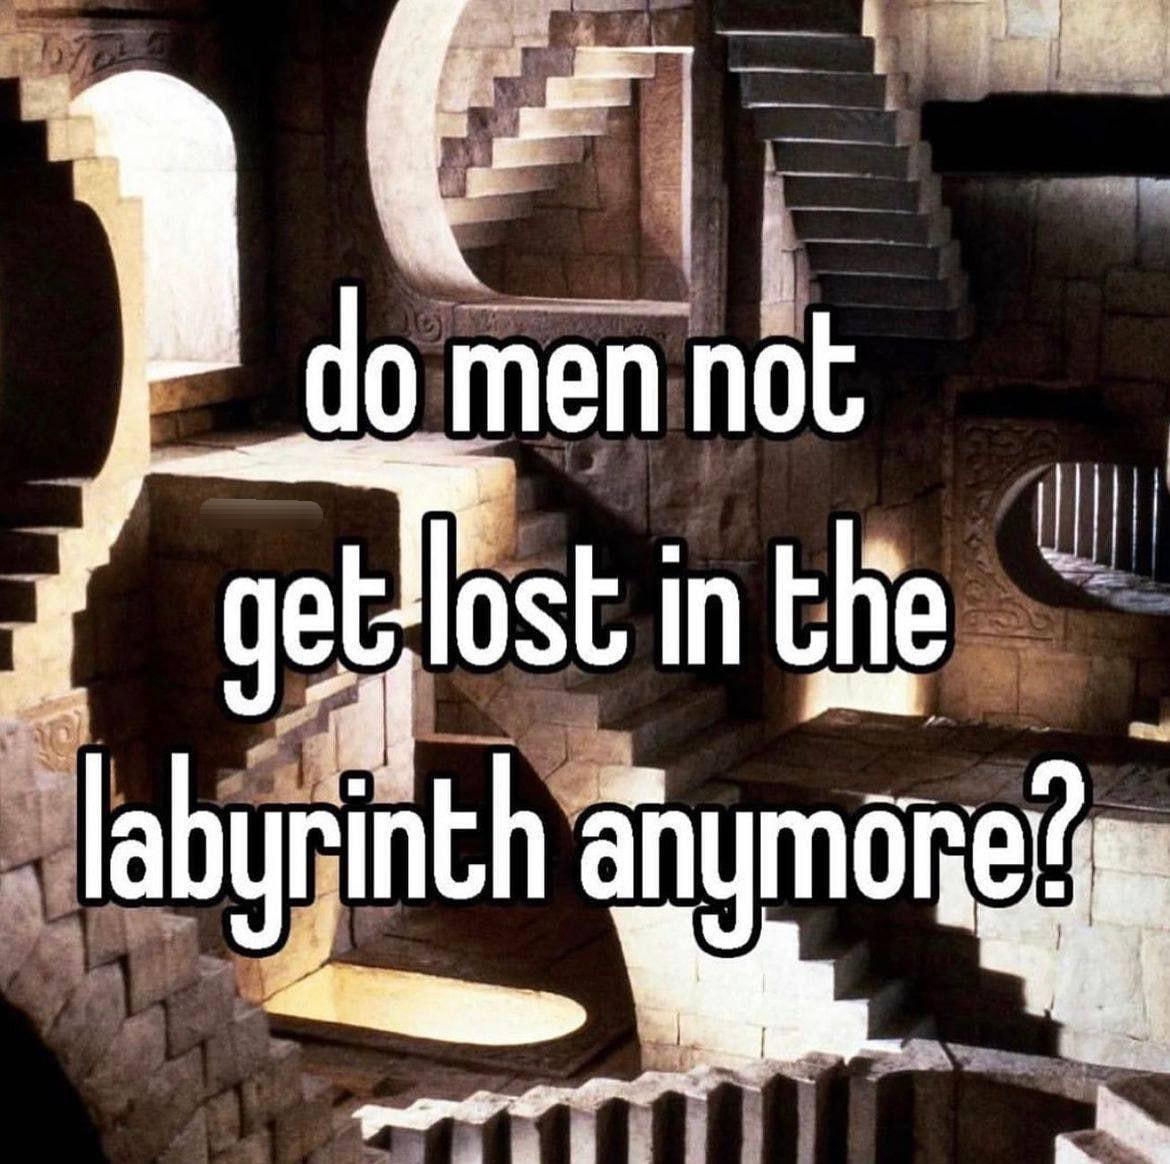 do men not get lost in the labyrinth anymore?